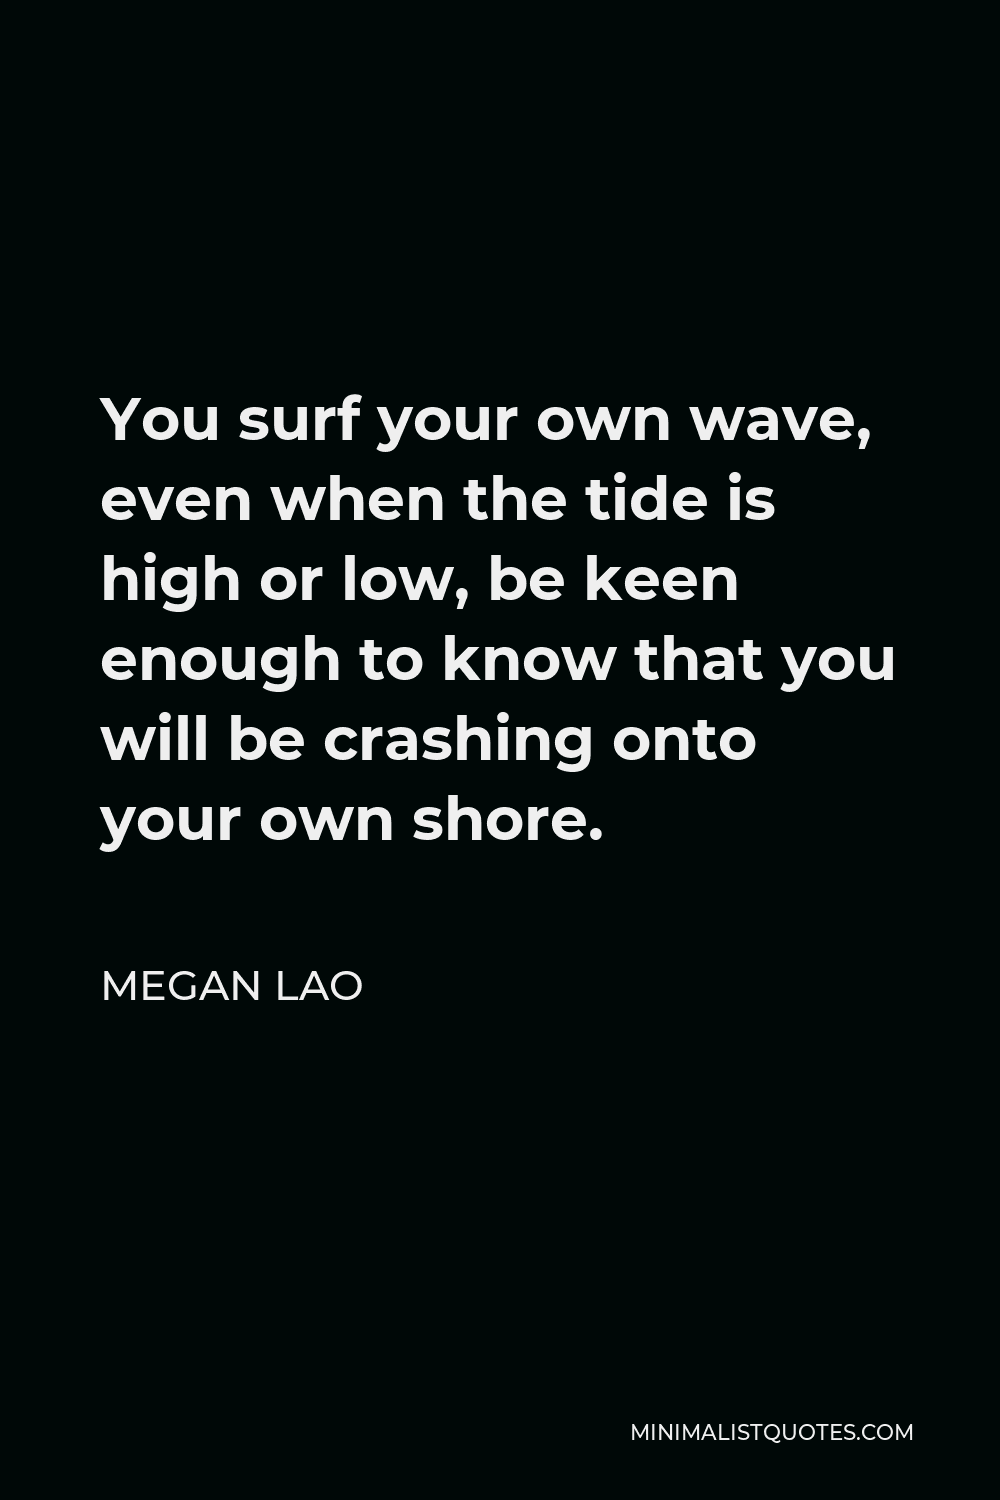 Megan Lao Quote - You surf your own wave, even when the tide is high or low, be keen enough to know that you will be crashing onto your own shore.